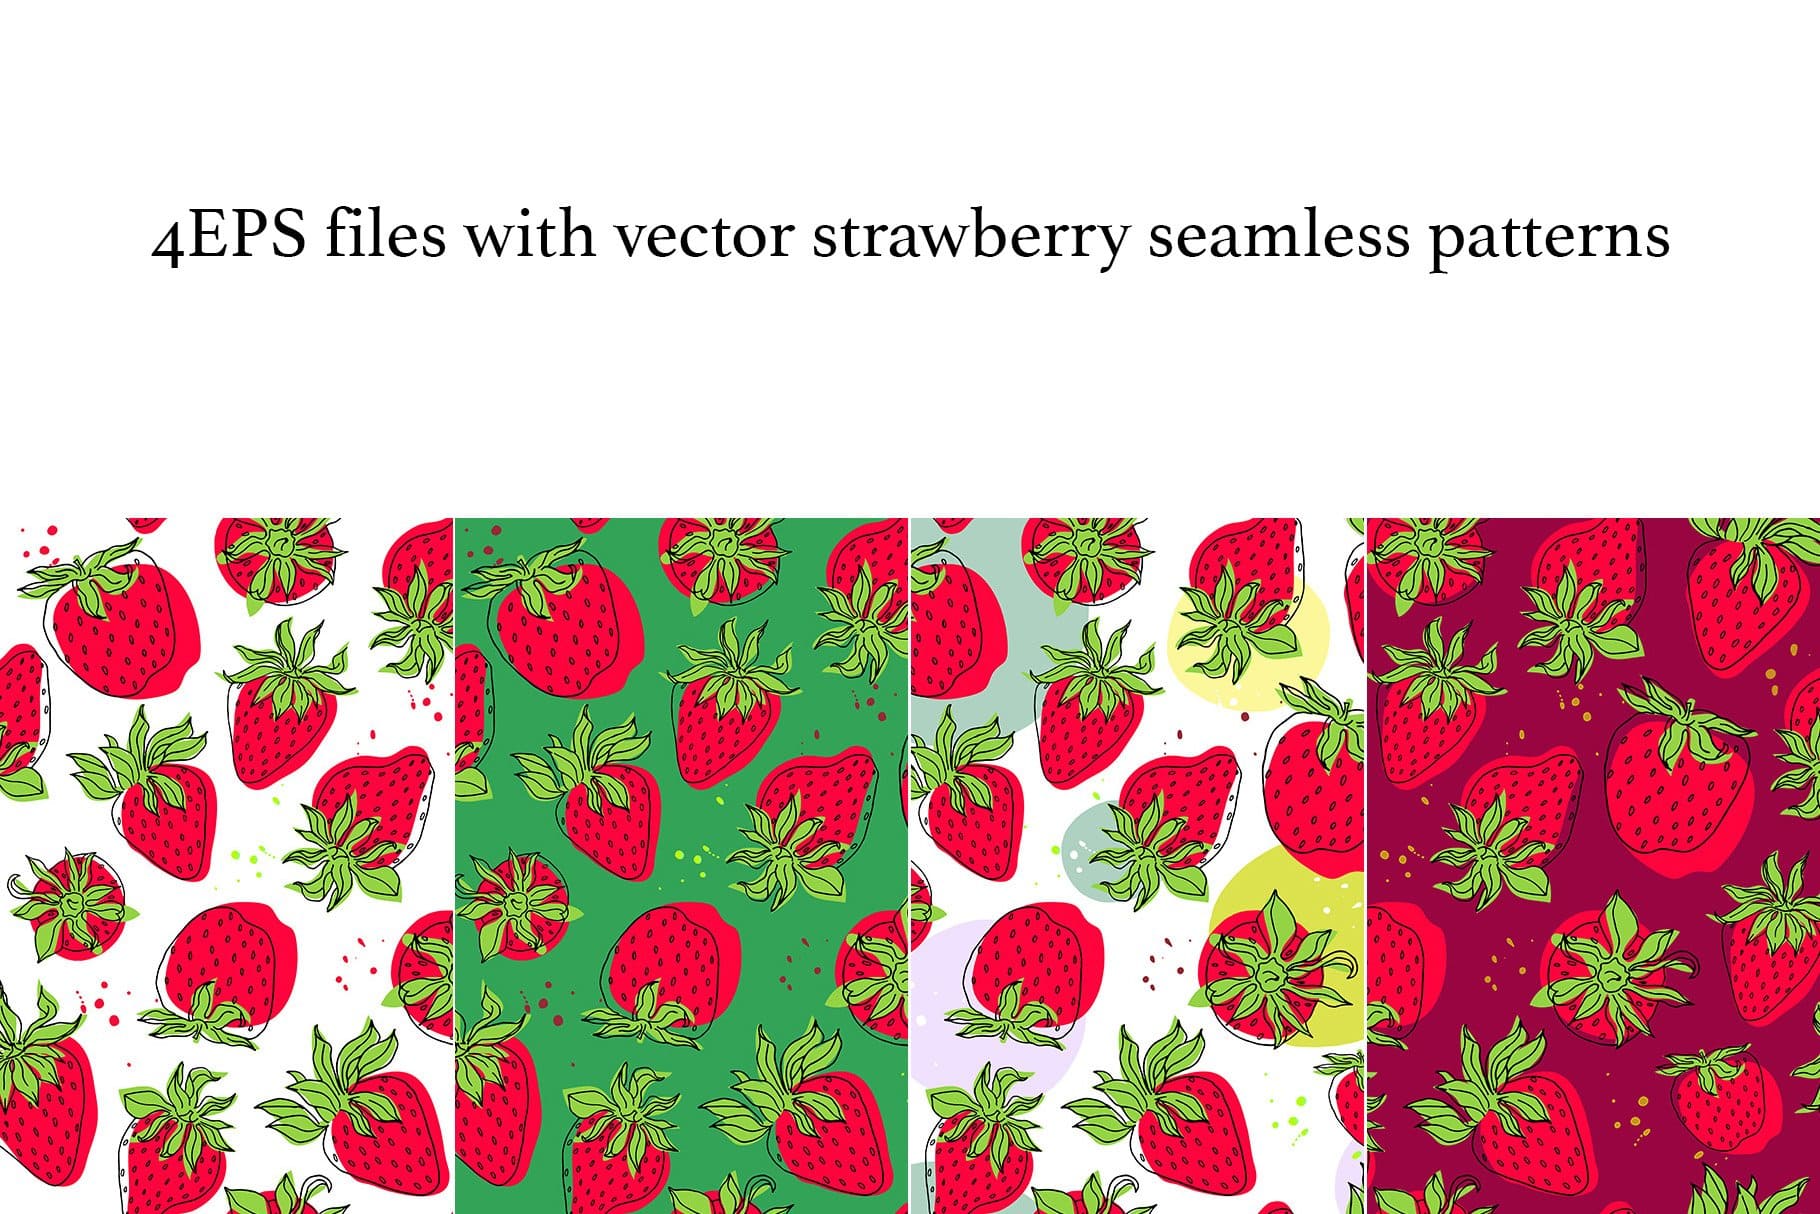 4 EPS files with vector strawberry seamless patterns.